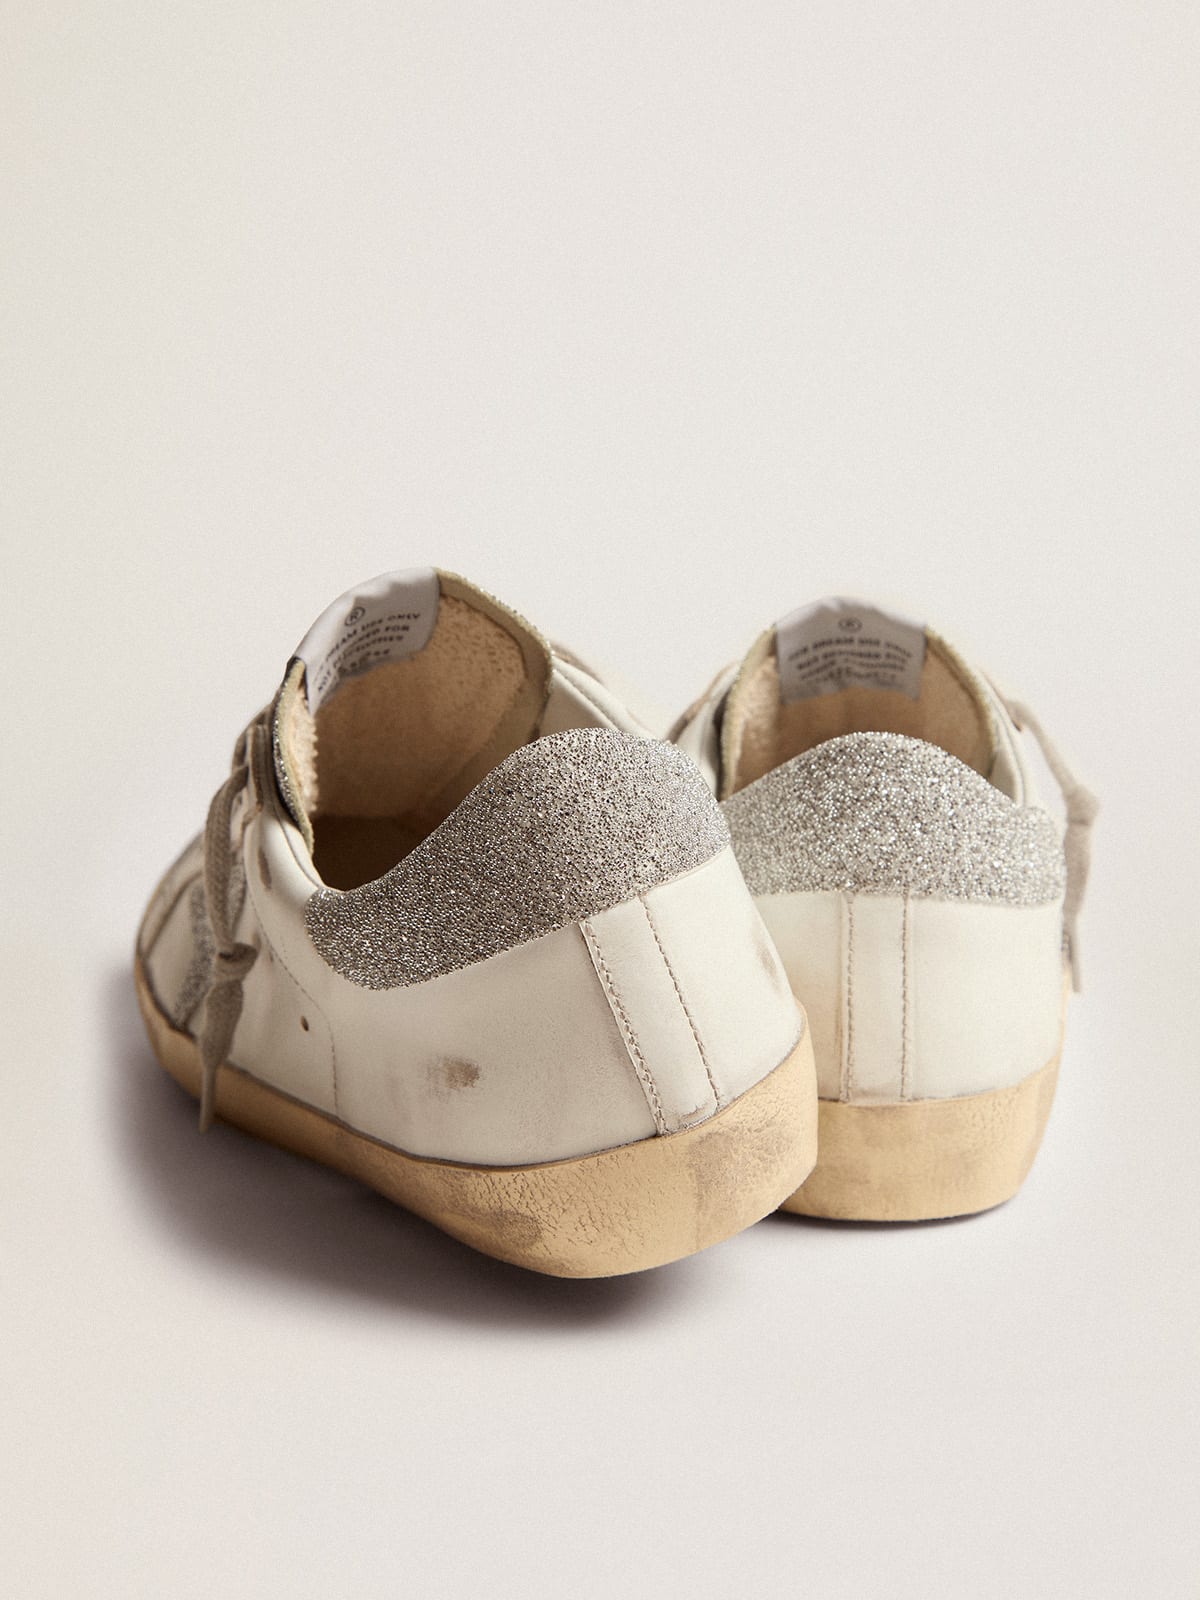 Golden Goose - Super-Star sneakers with white leather upper and Swarovski crystal inserts in 